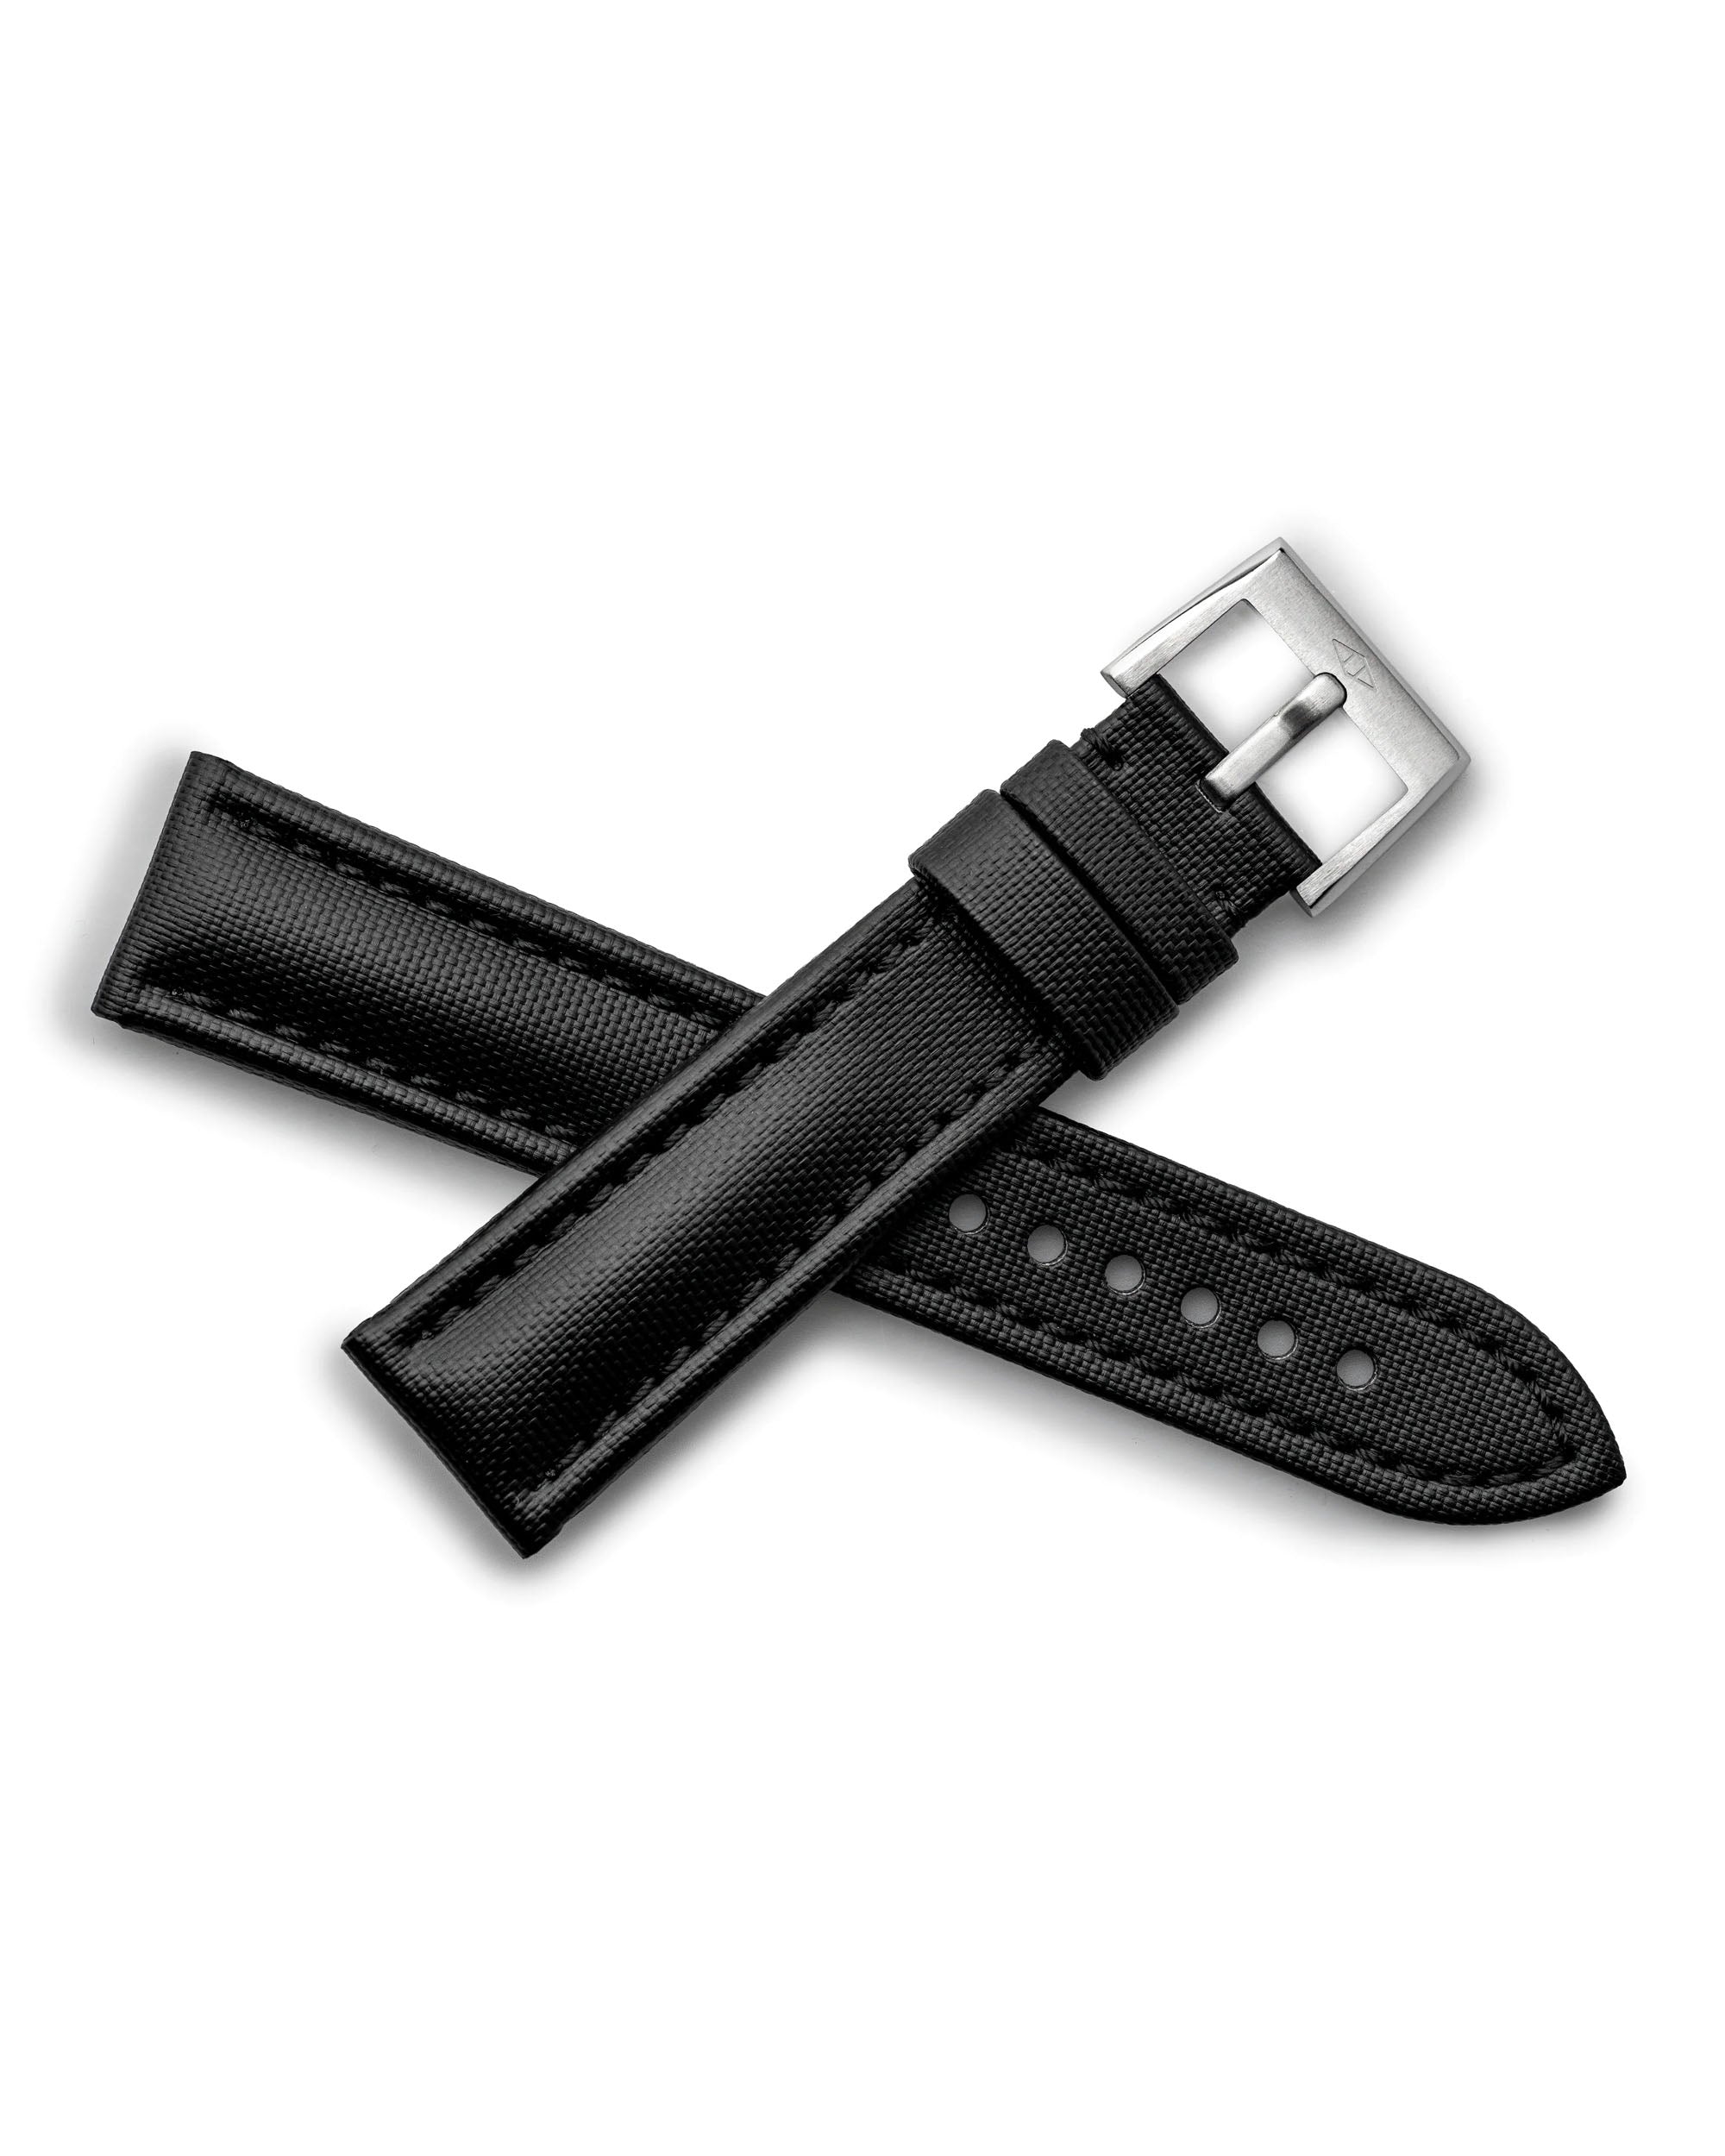 Artem Classic Sailcloth With Quick Release - Black with Black Stitching